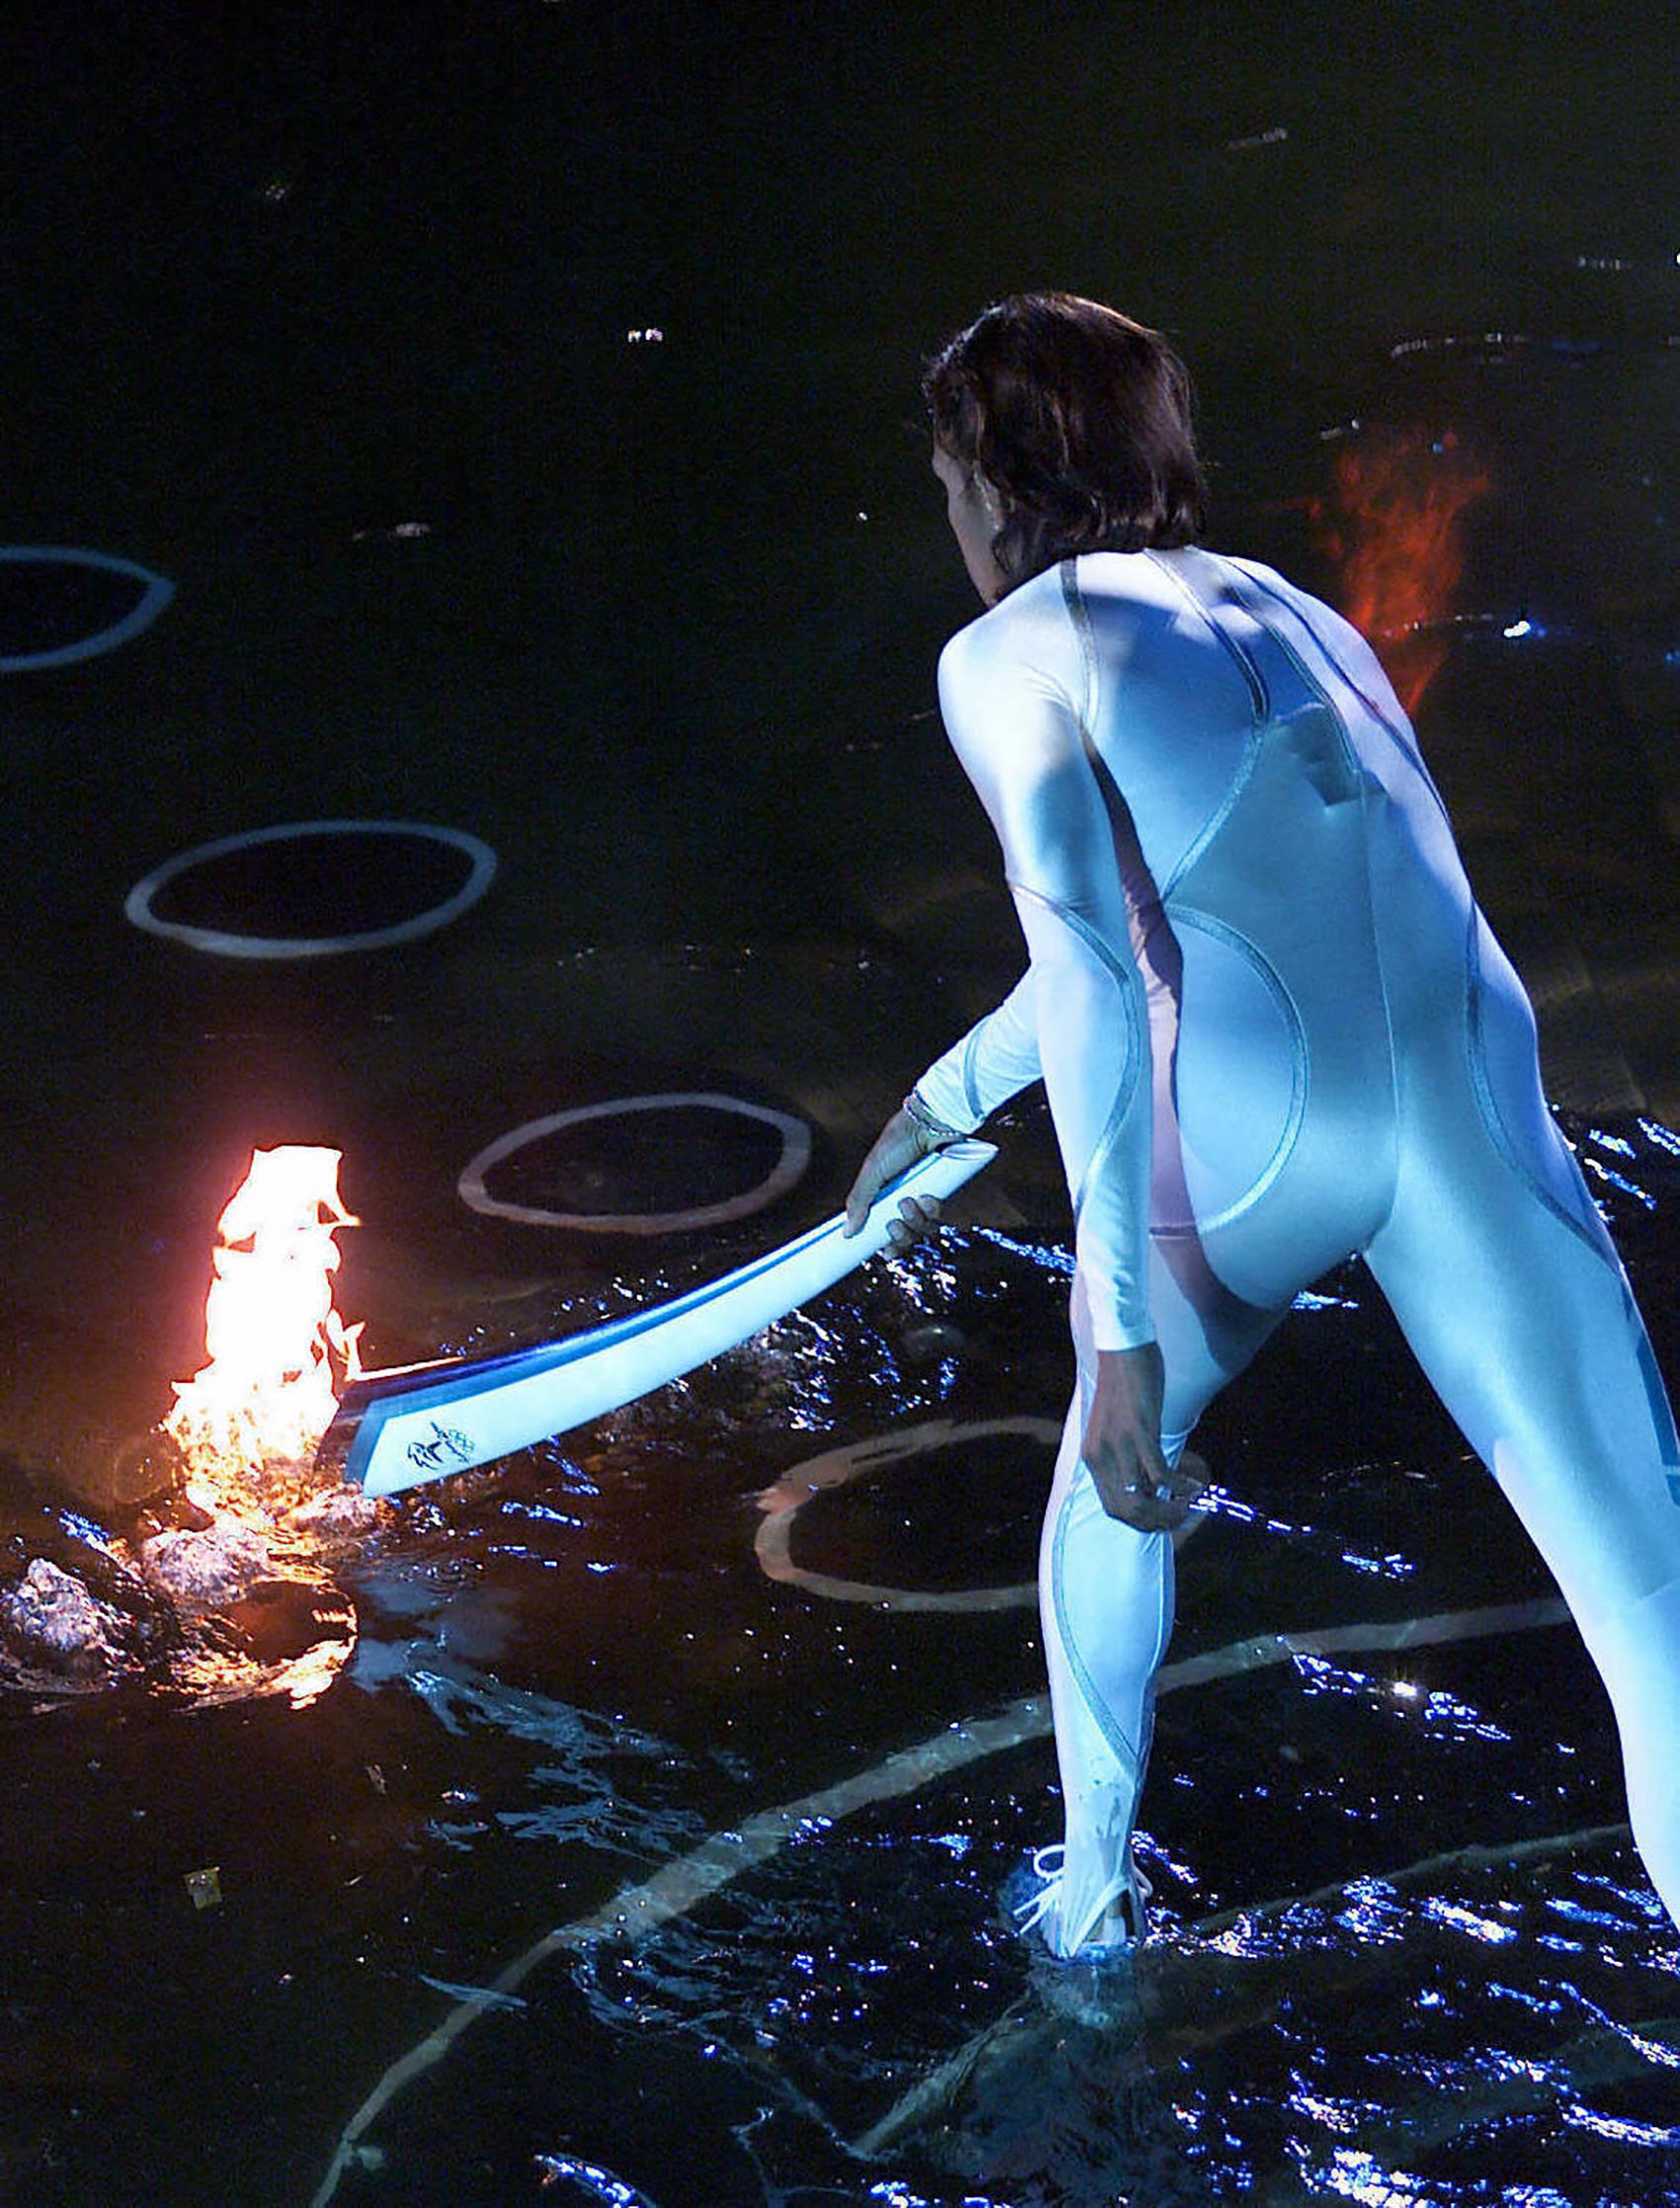   Aust athlete Cathy Freeman lighting cauldron during Sydney Olympic Games opening ceremony 15 Sep 2000.
/Olympic/Games/2000  